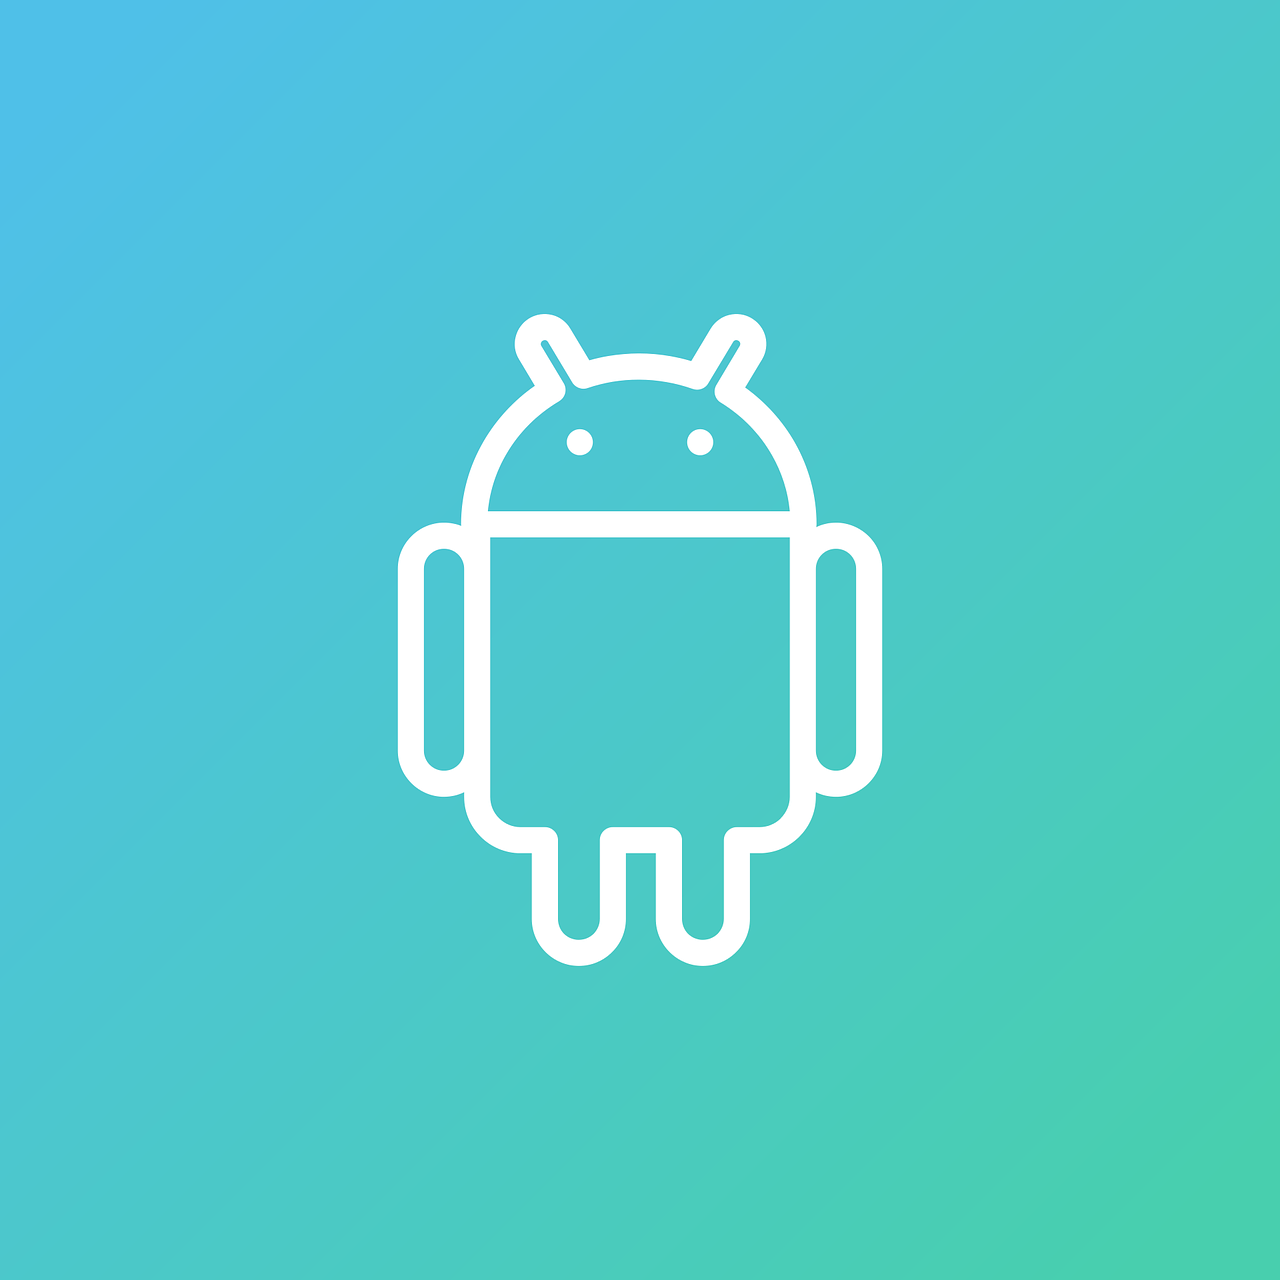 Значок Android